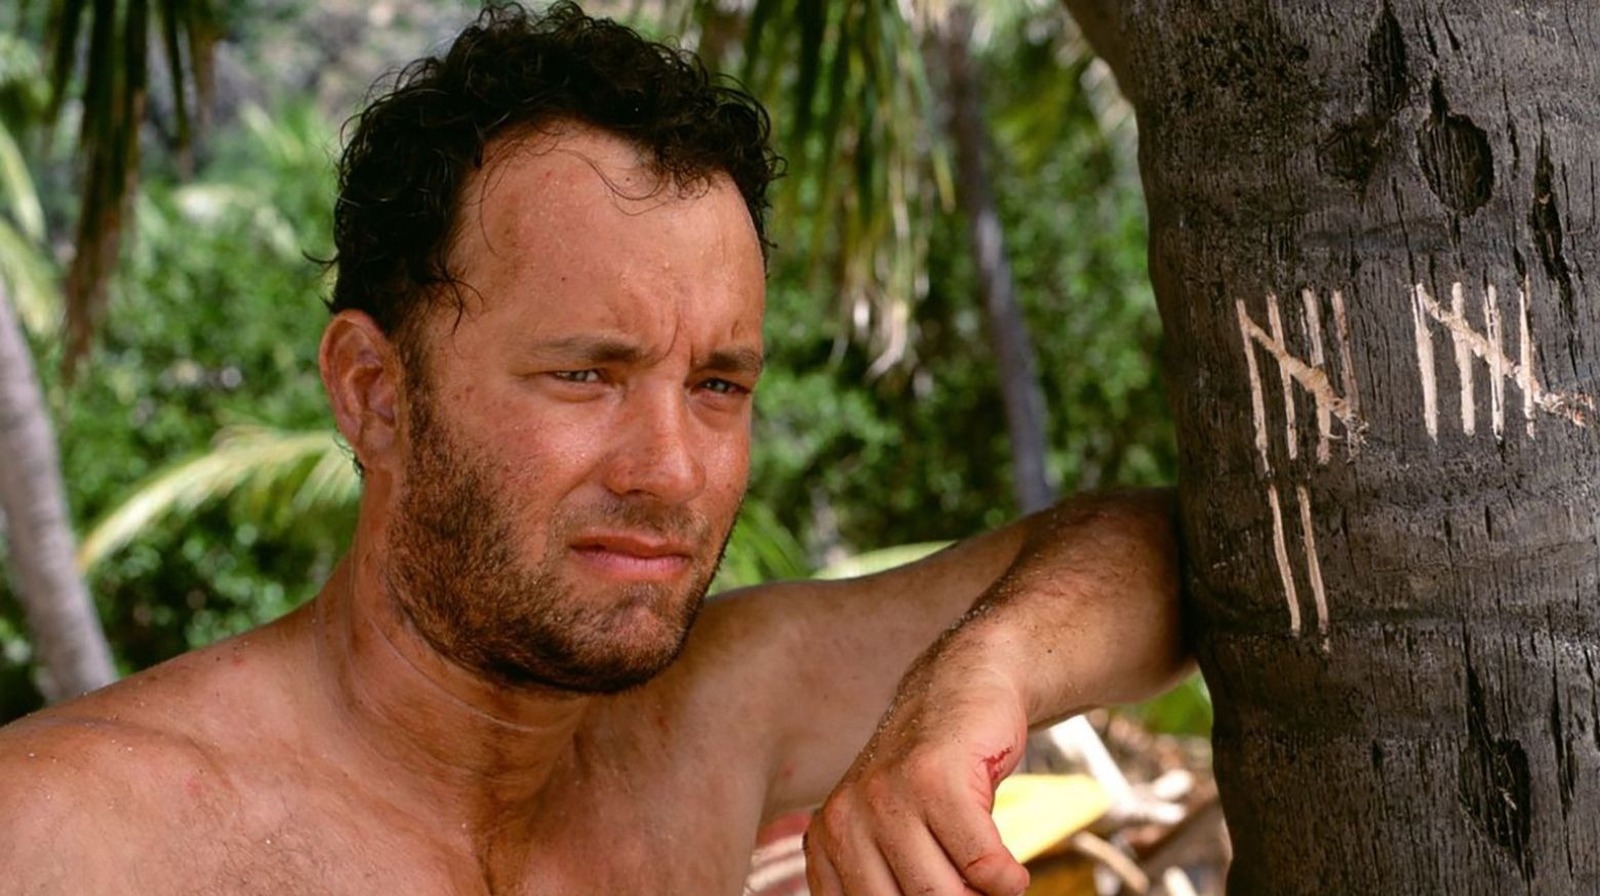 Losing Weight For Cast Away Was A 'Burden' On Tom Hanks 